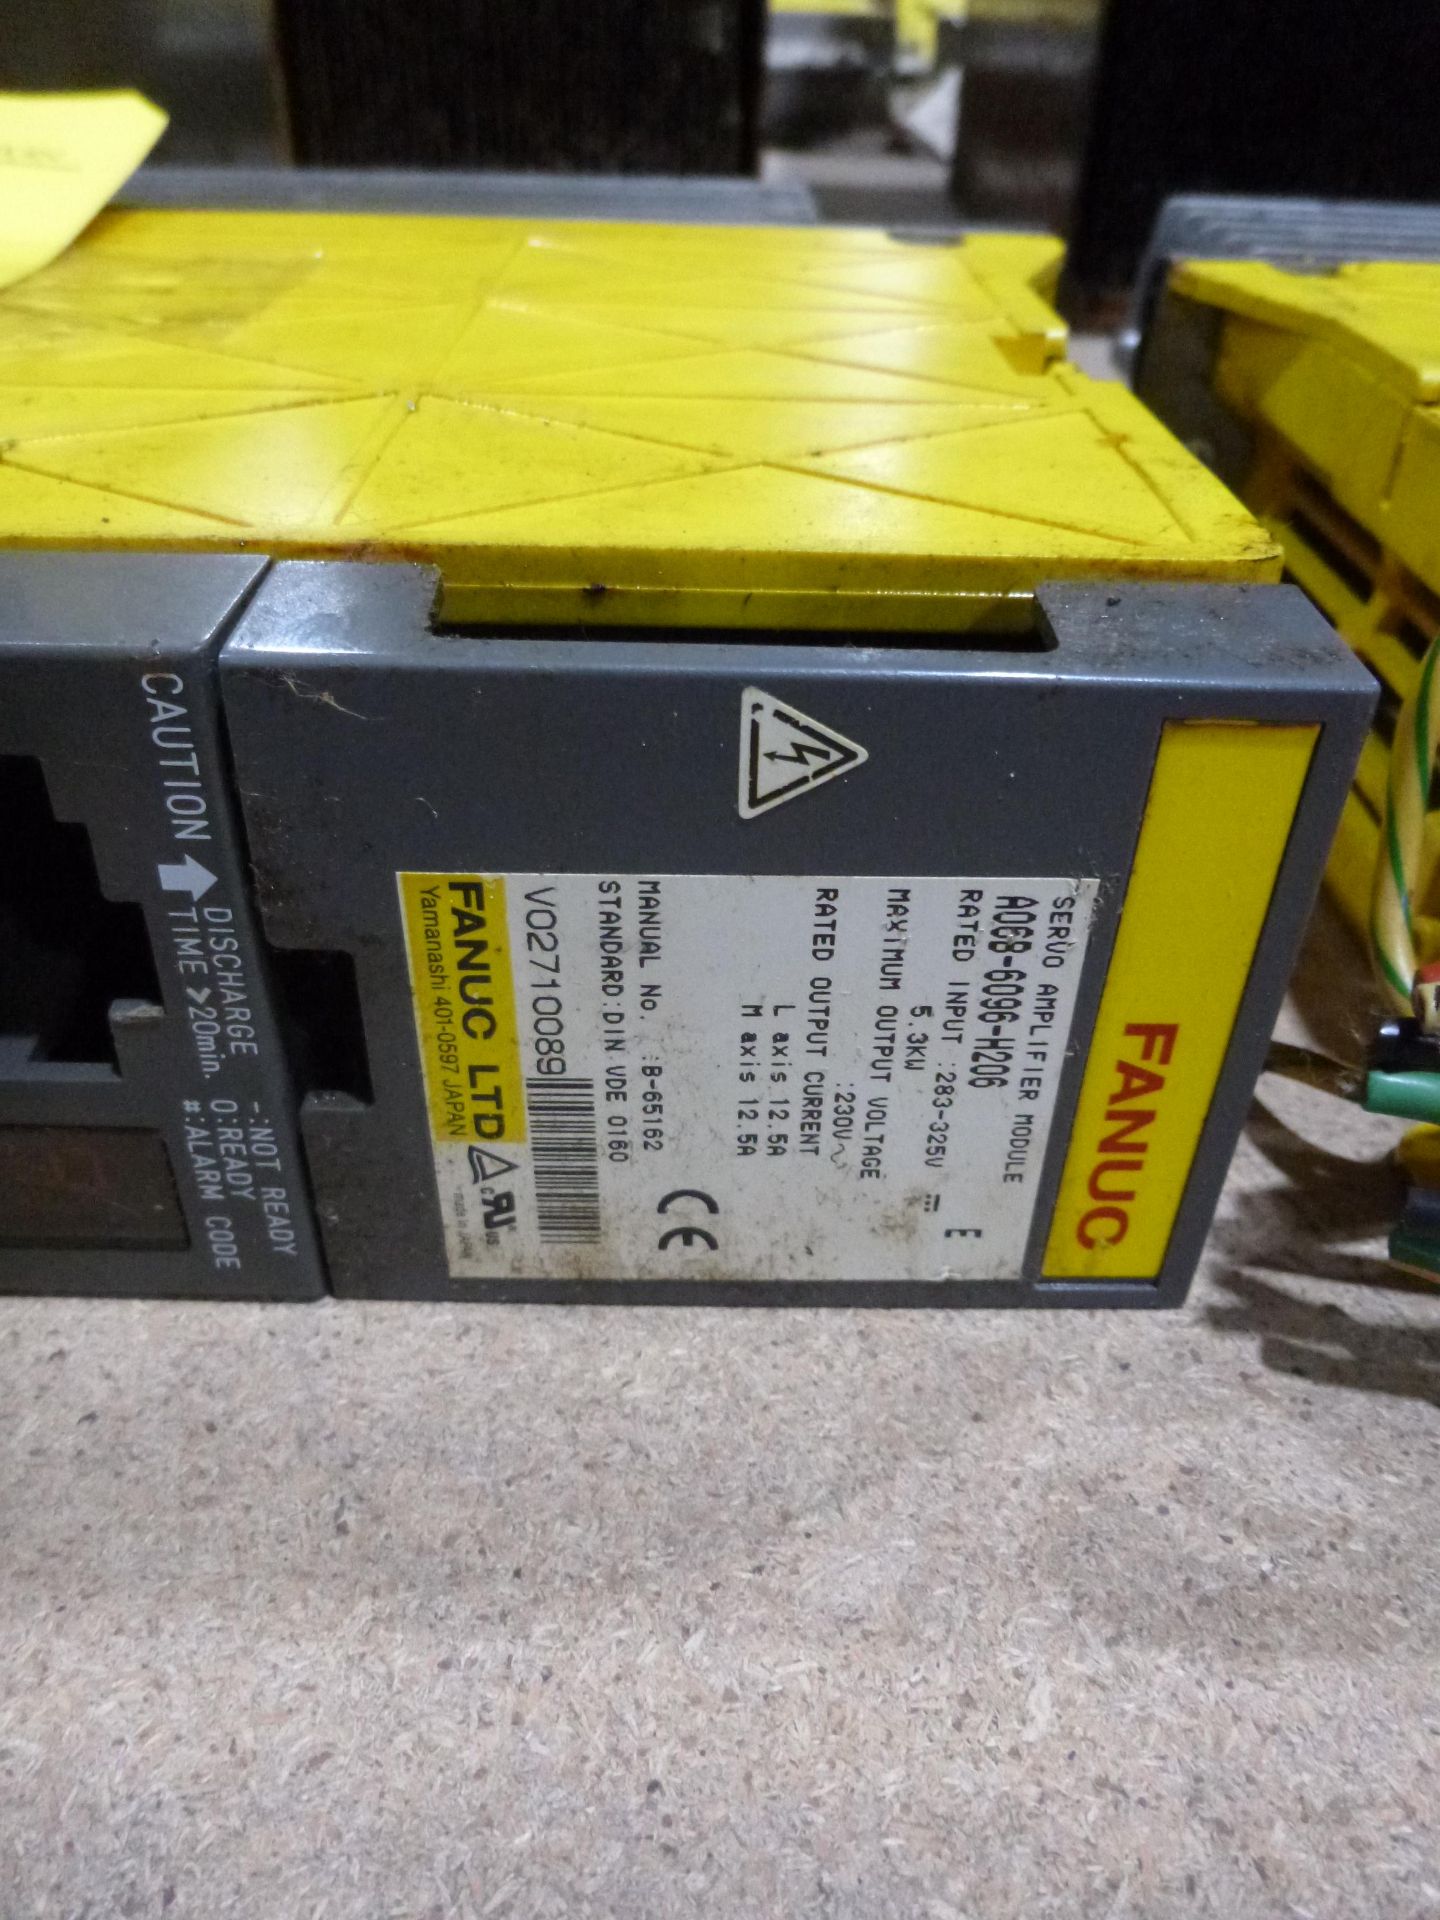 Fanuc servo amplifier module model A06B-6096-H206, as always with Brolyn LLC auctions, all lots - Image 2 of 2